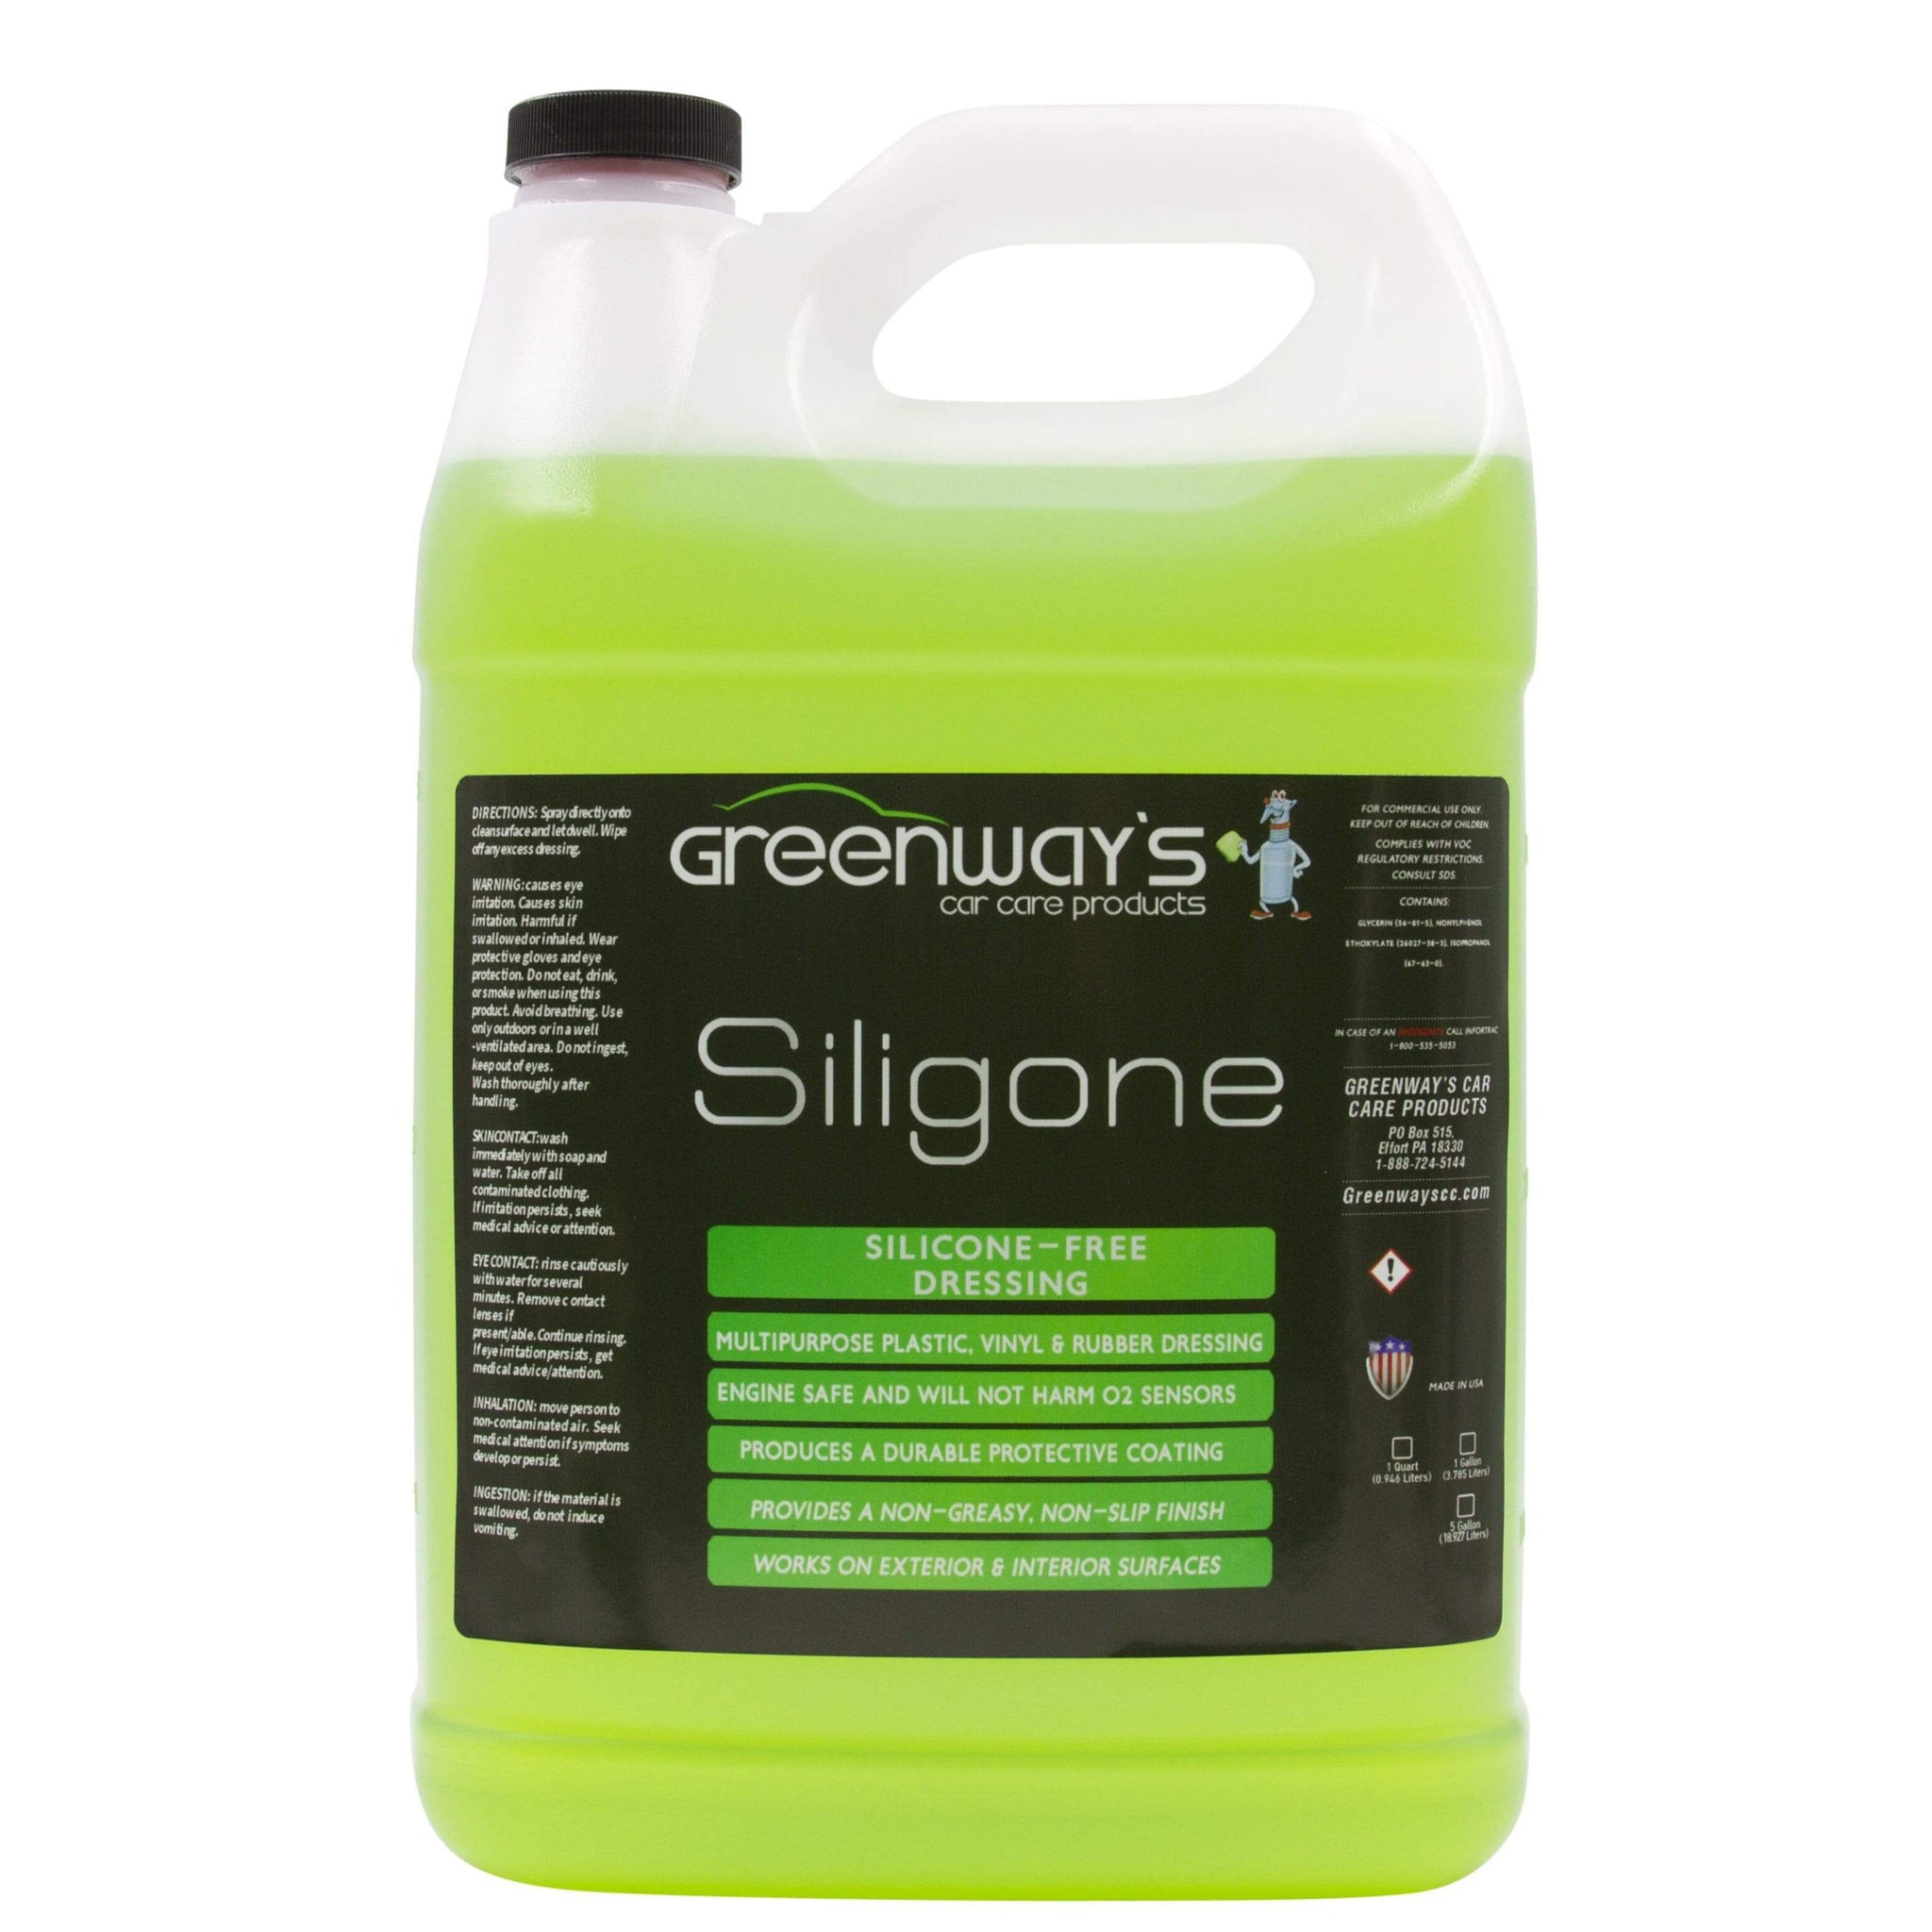 Greenway’s Siligone, silicone-free water-based, deep shine engine and exterior dressing, green apple lime scented, 1 gallon. 